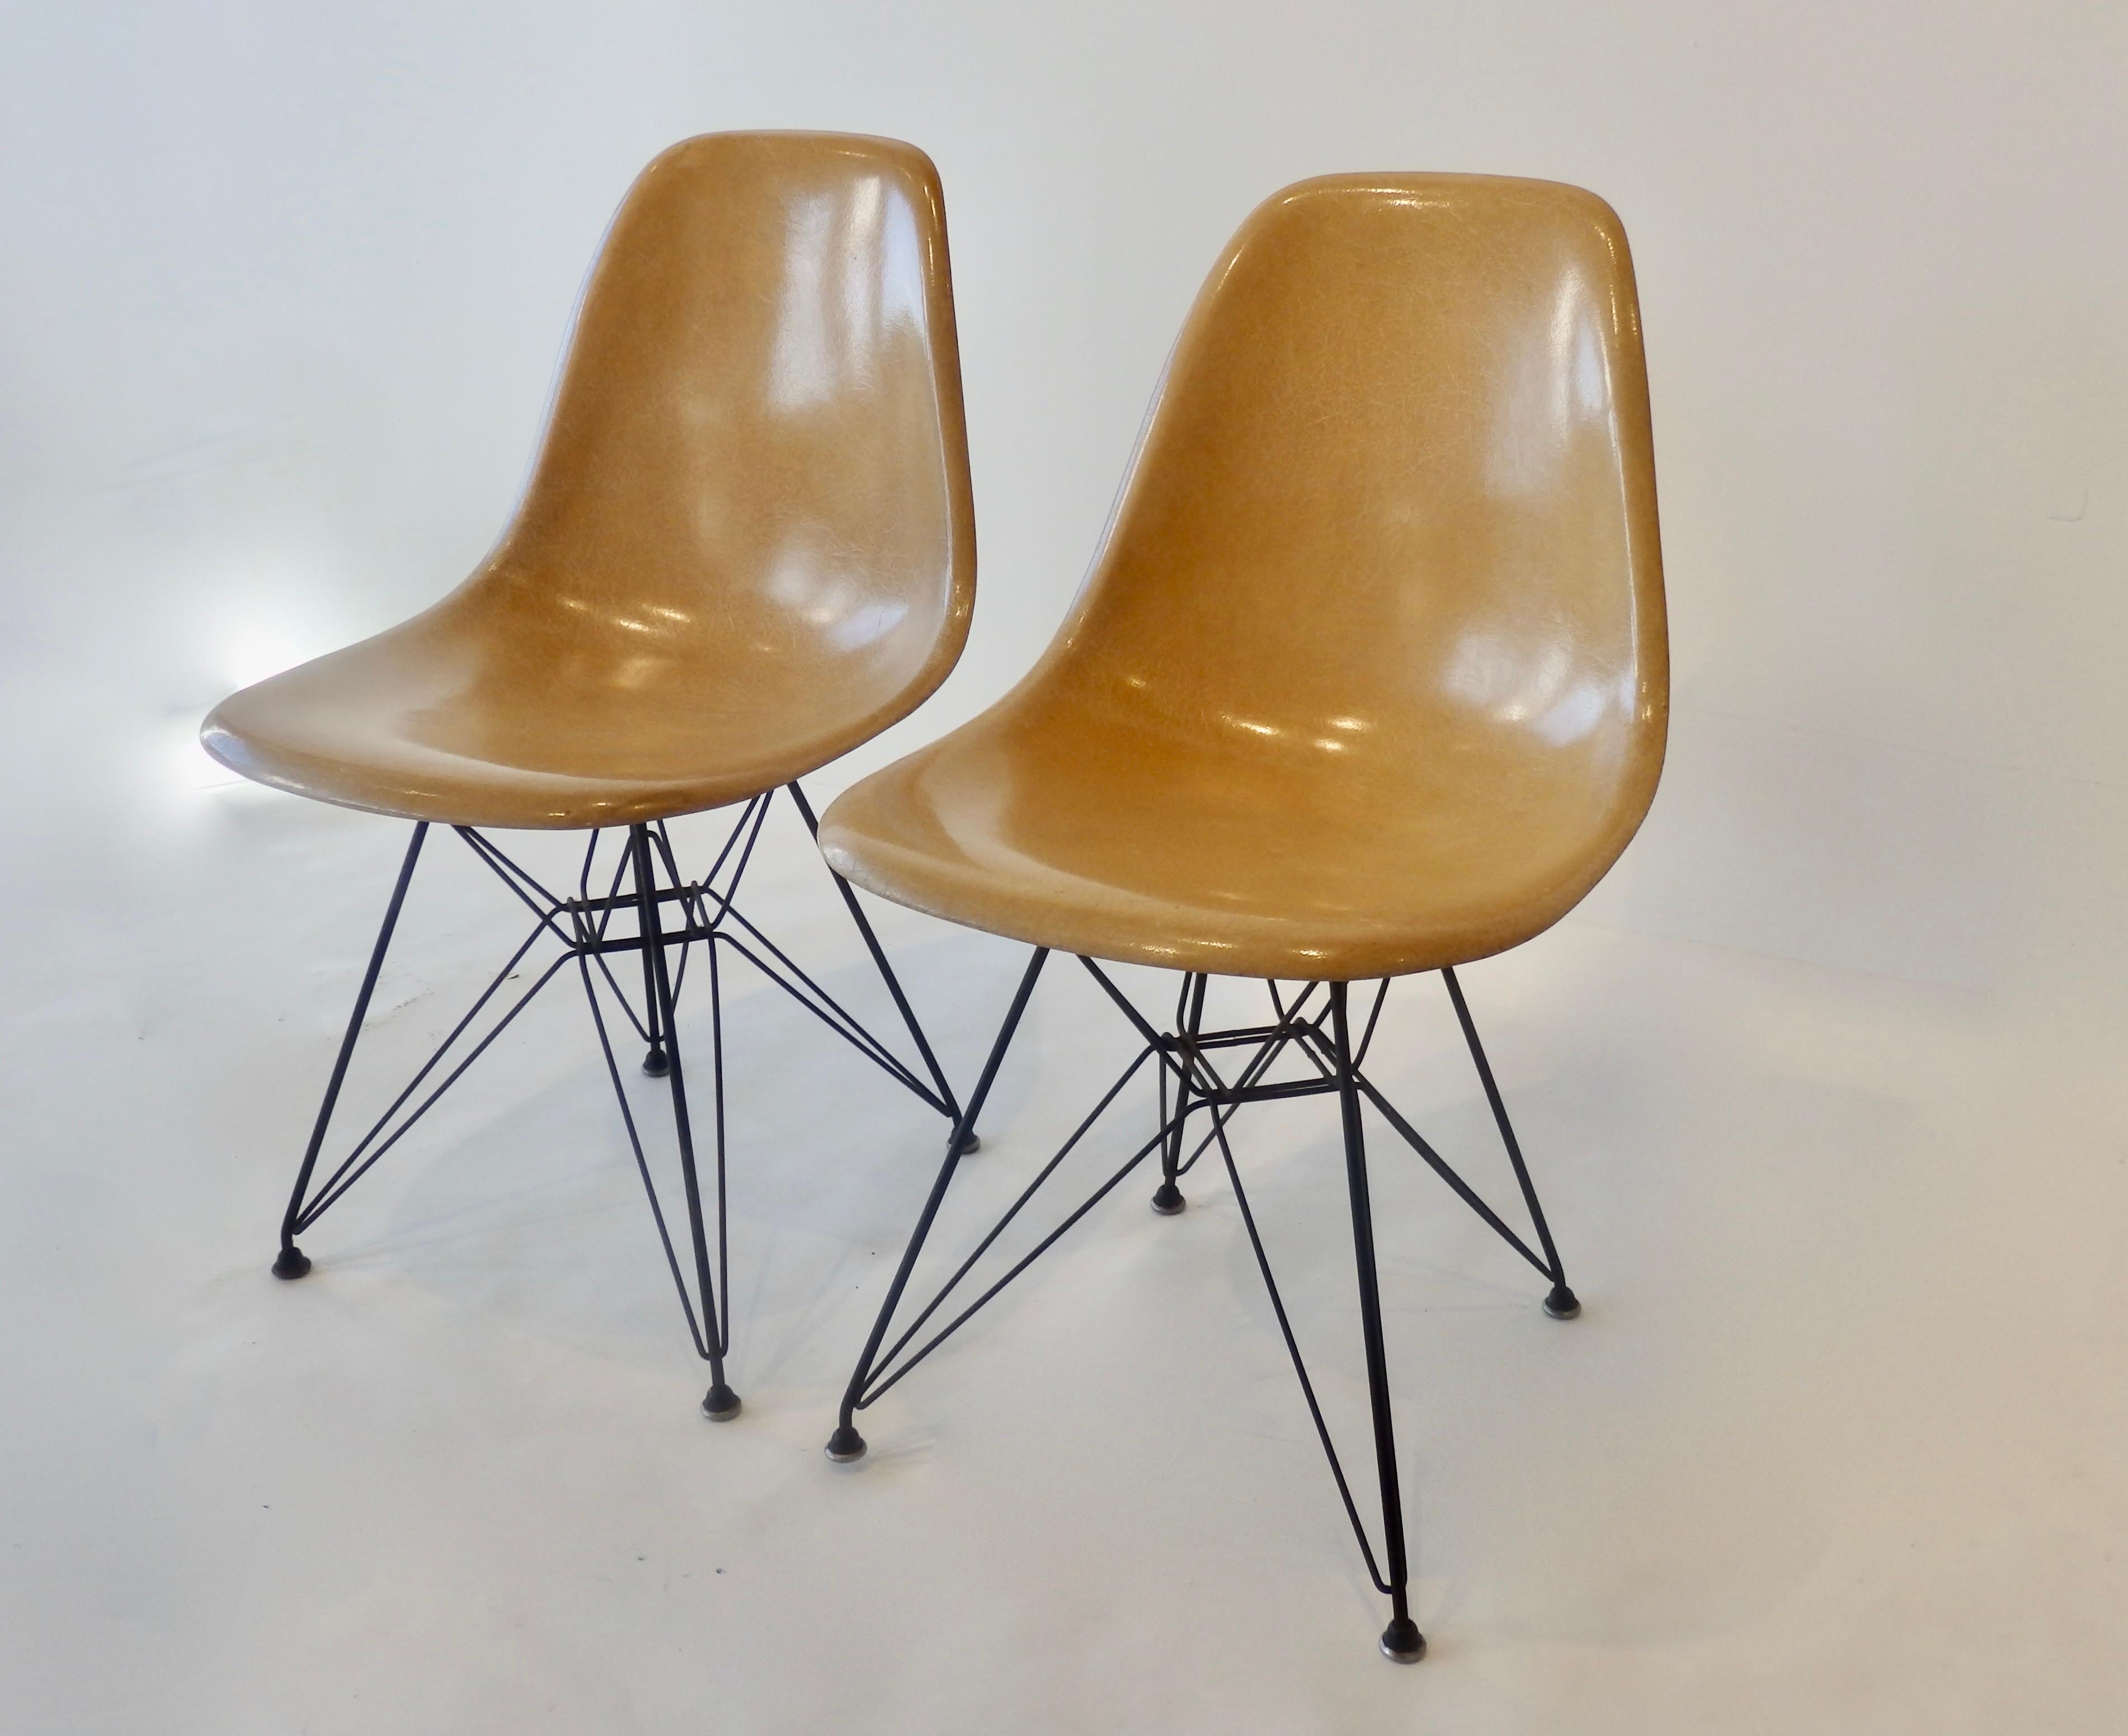 Nice golden patina on a pair of Charles and Ray Eames fiberglass shell chairs. Earlier production with original slotted screws attaching Eiffel tower bases with original rubber boot glides.